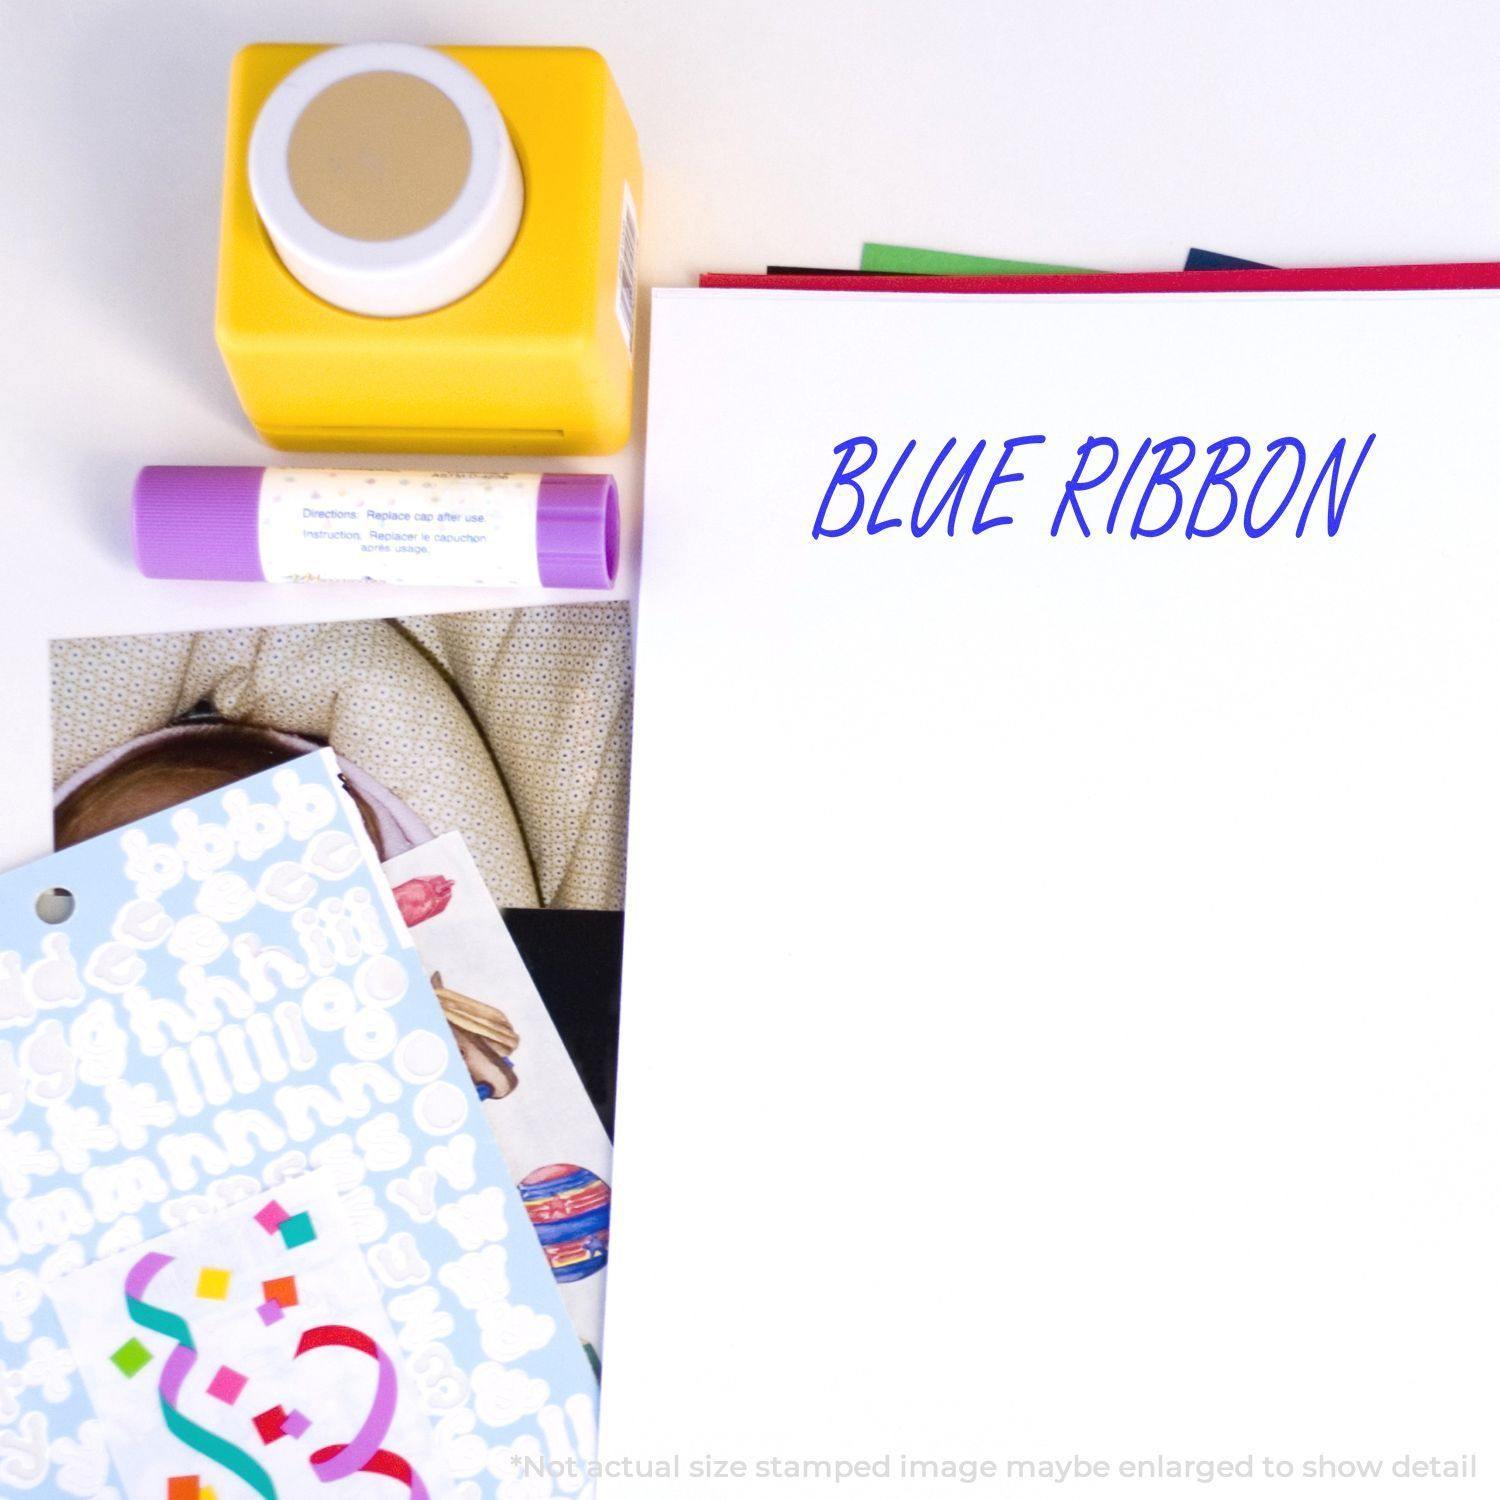 A self-inking stamp with a stamped image showing how the text "BLUE RIBBON" is displayed after stamping.